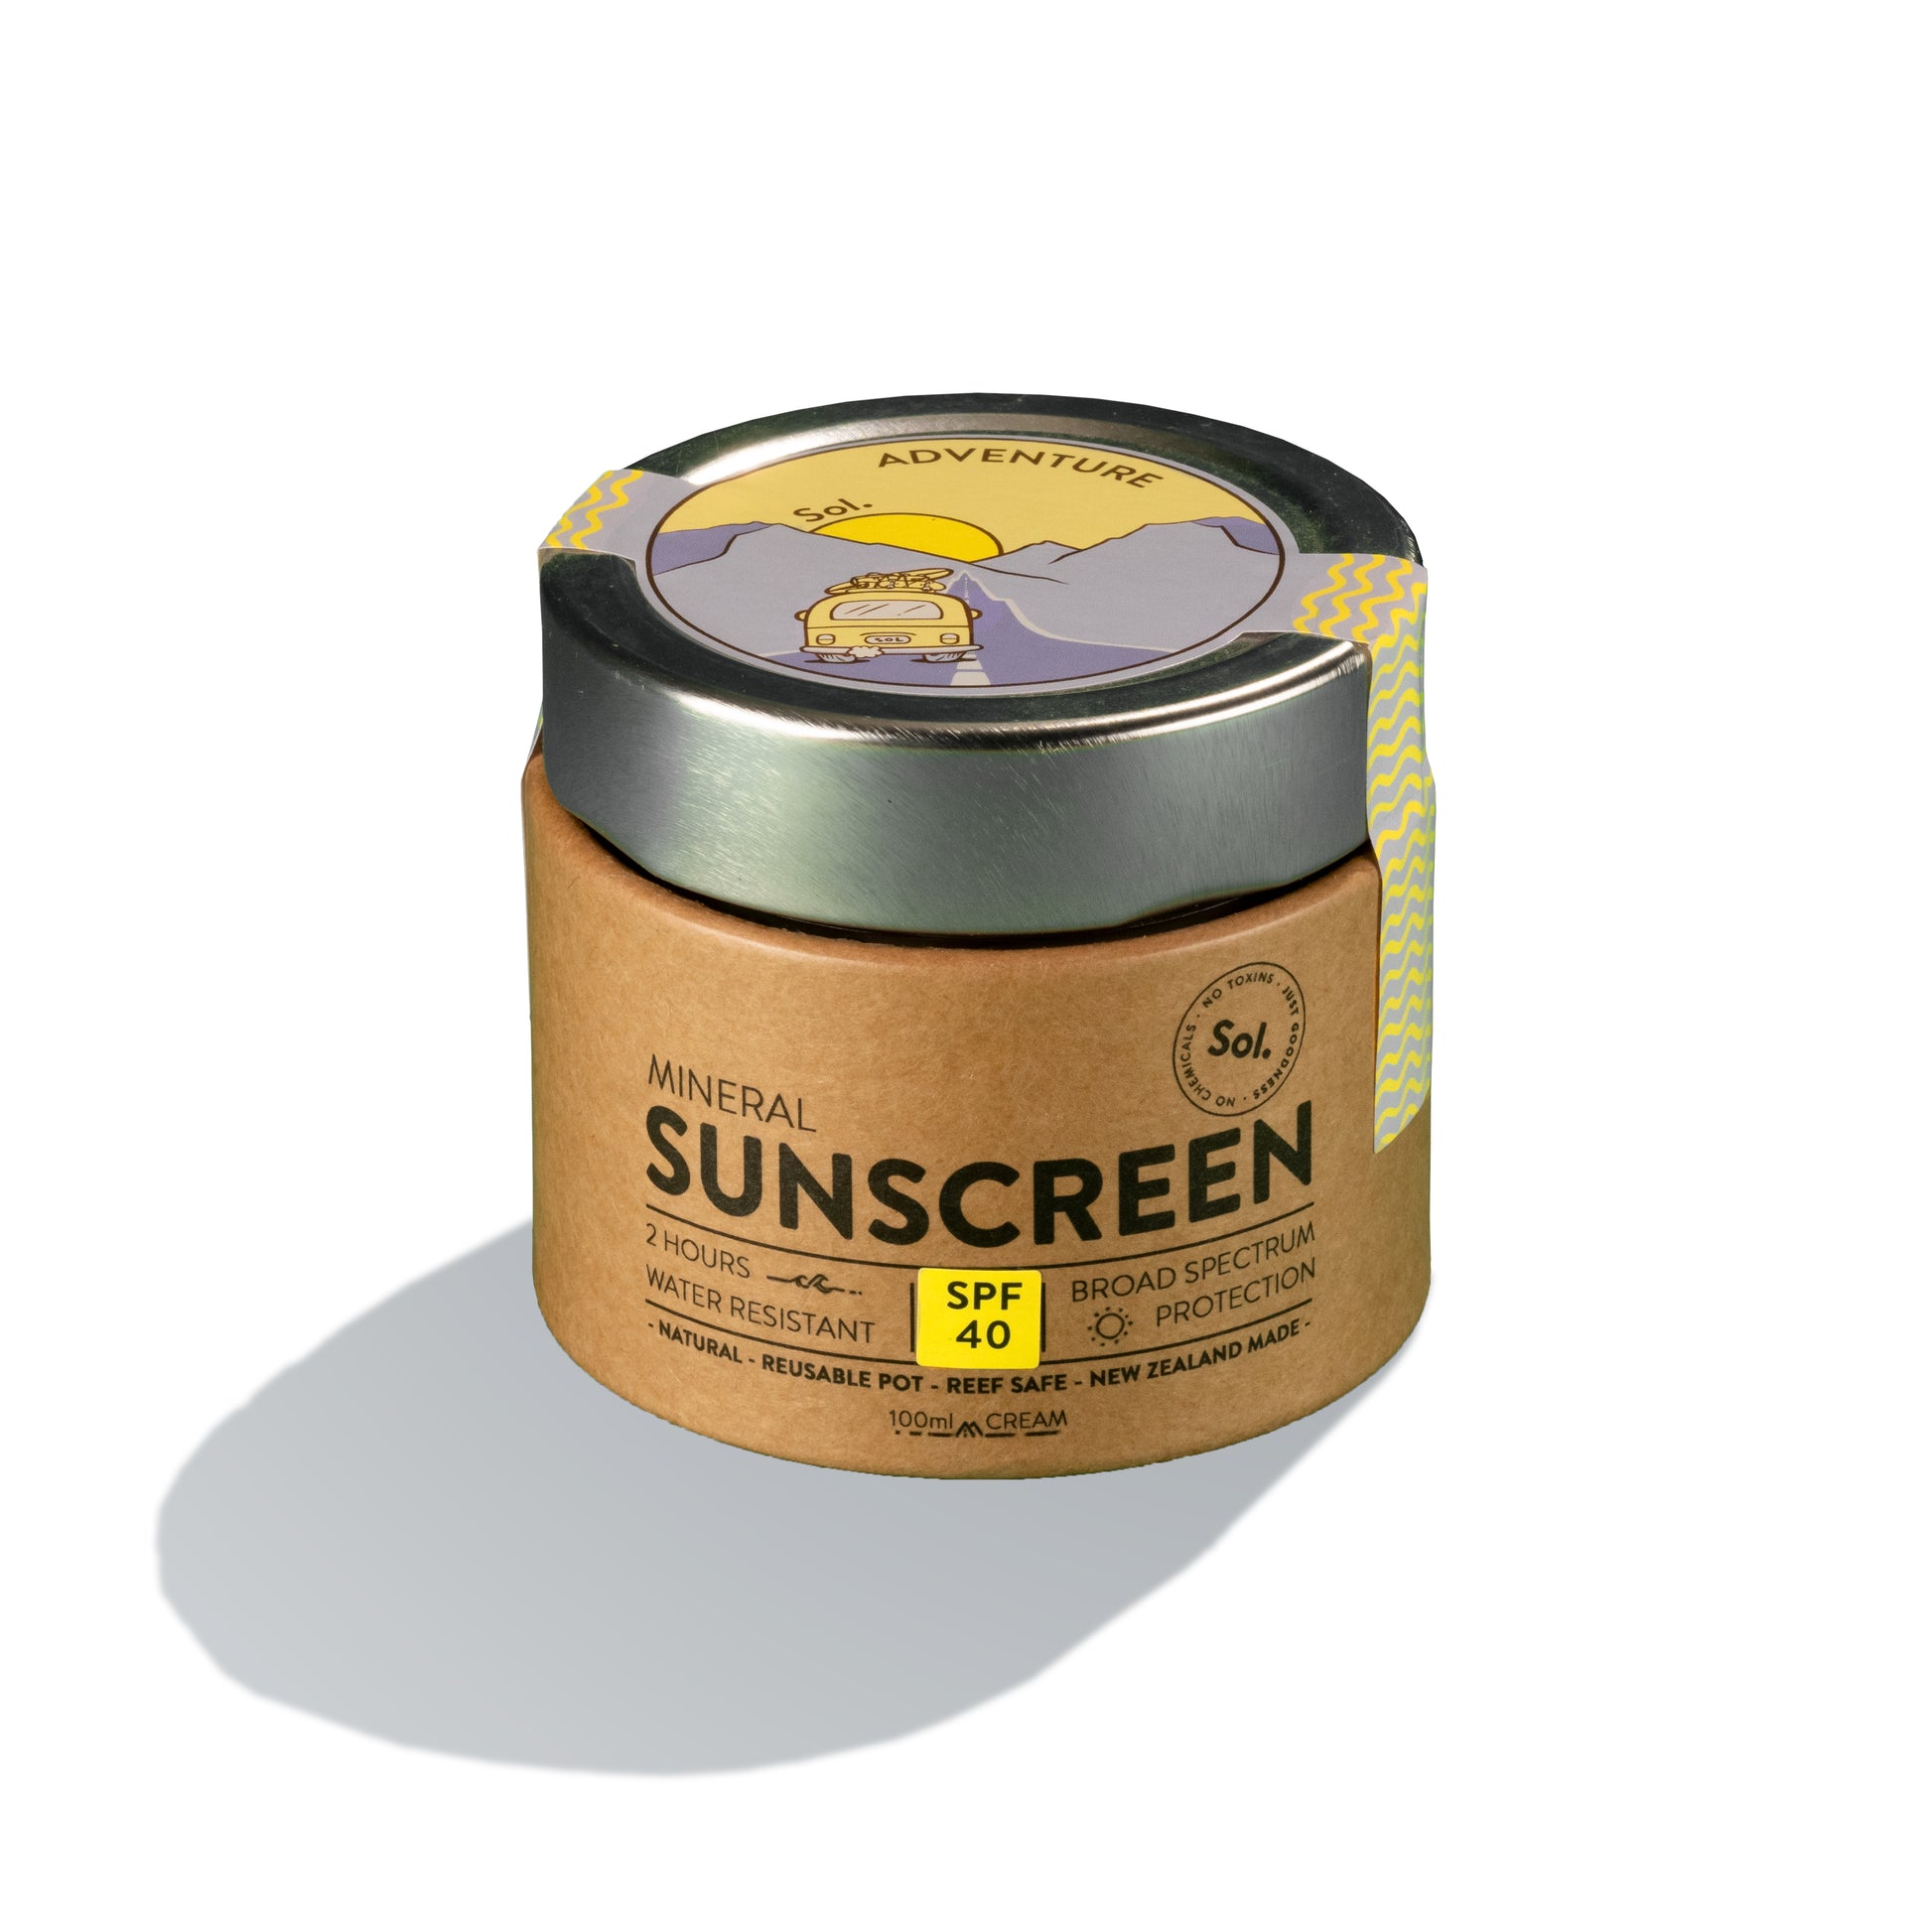 New Zealand made natural mineral sustainable sunscreen. ethically sourced adventure sol 